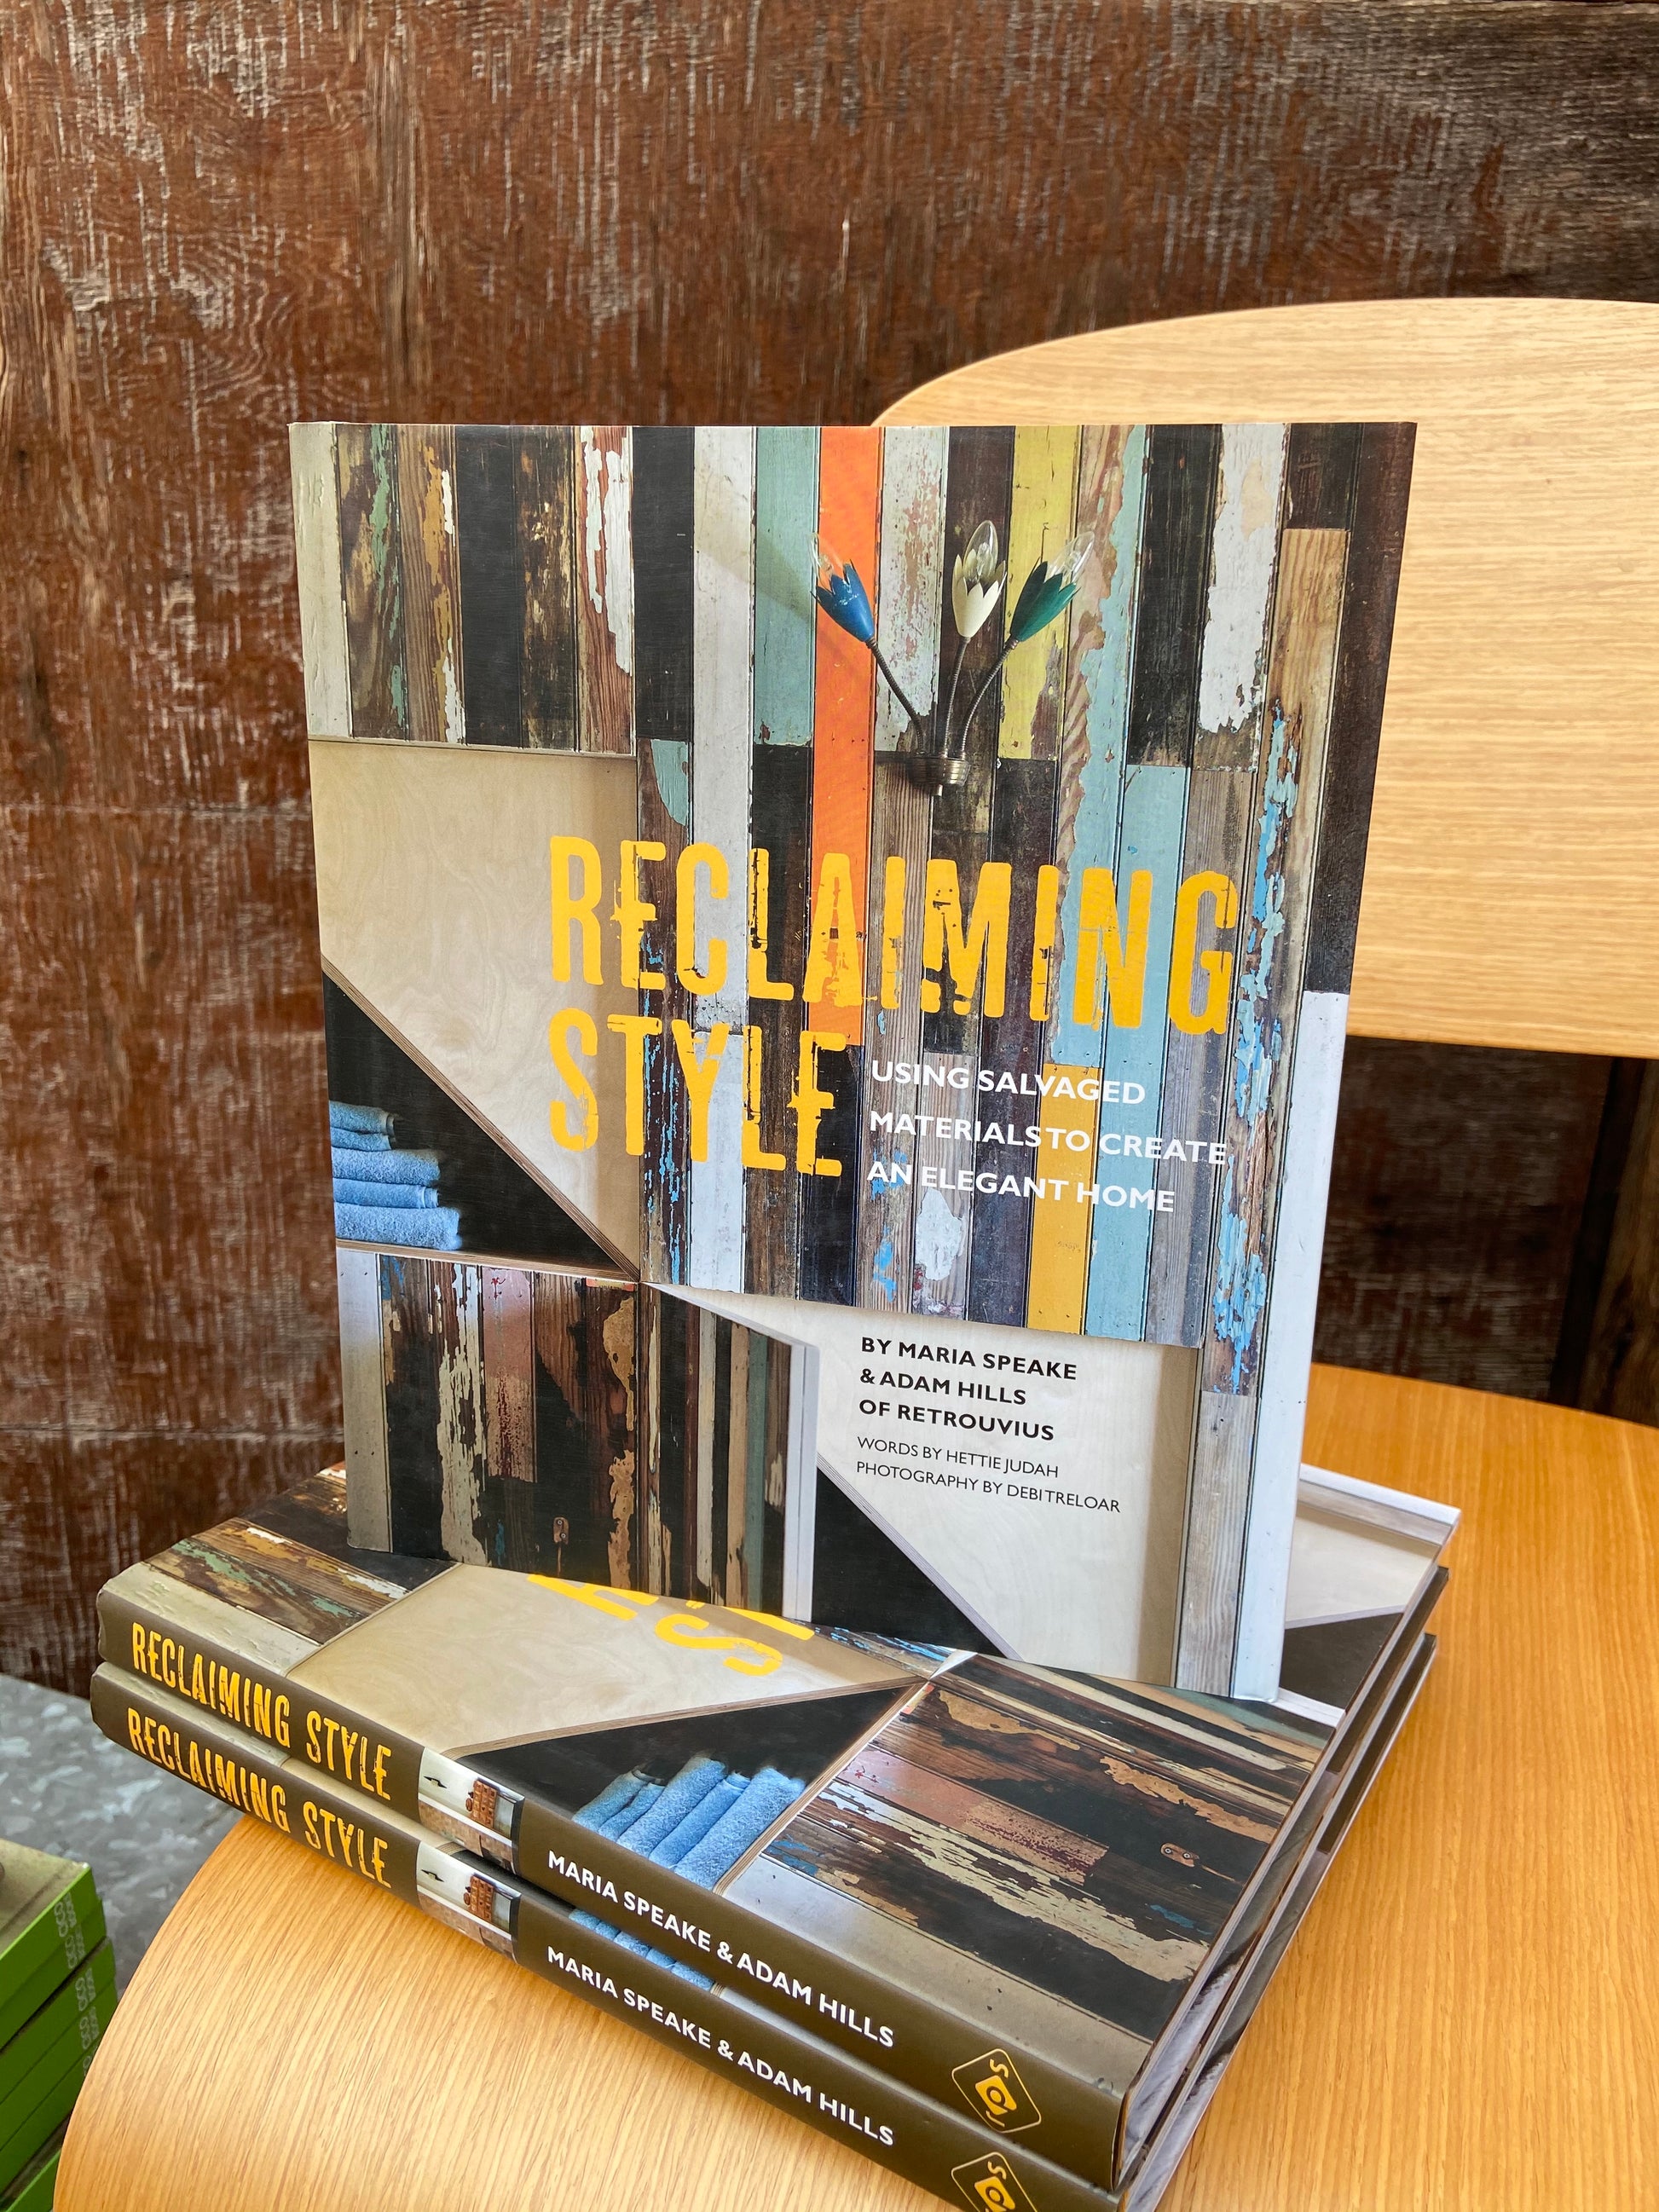 Reclaiming Style follows Adam Hills and Maria Speake of Retrouvius from the demolition site to their salvage warehouse to the process of designing with reclaimed materials to create elegant and sophisticated family homes.